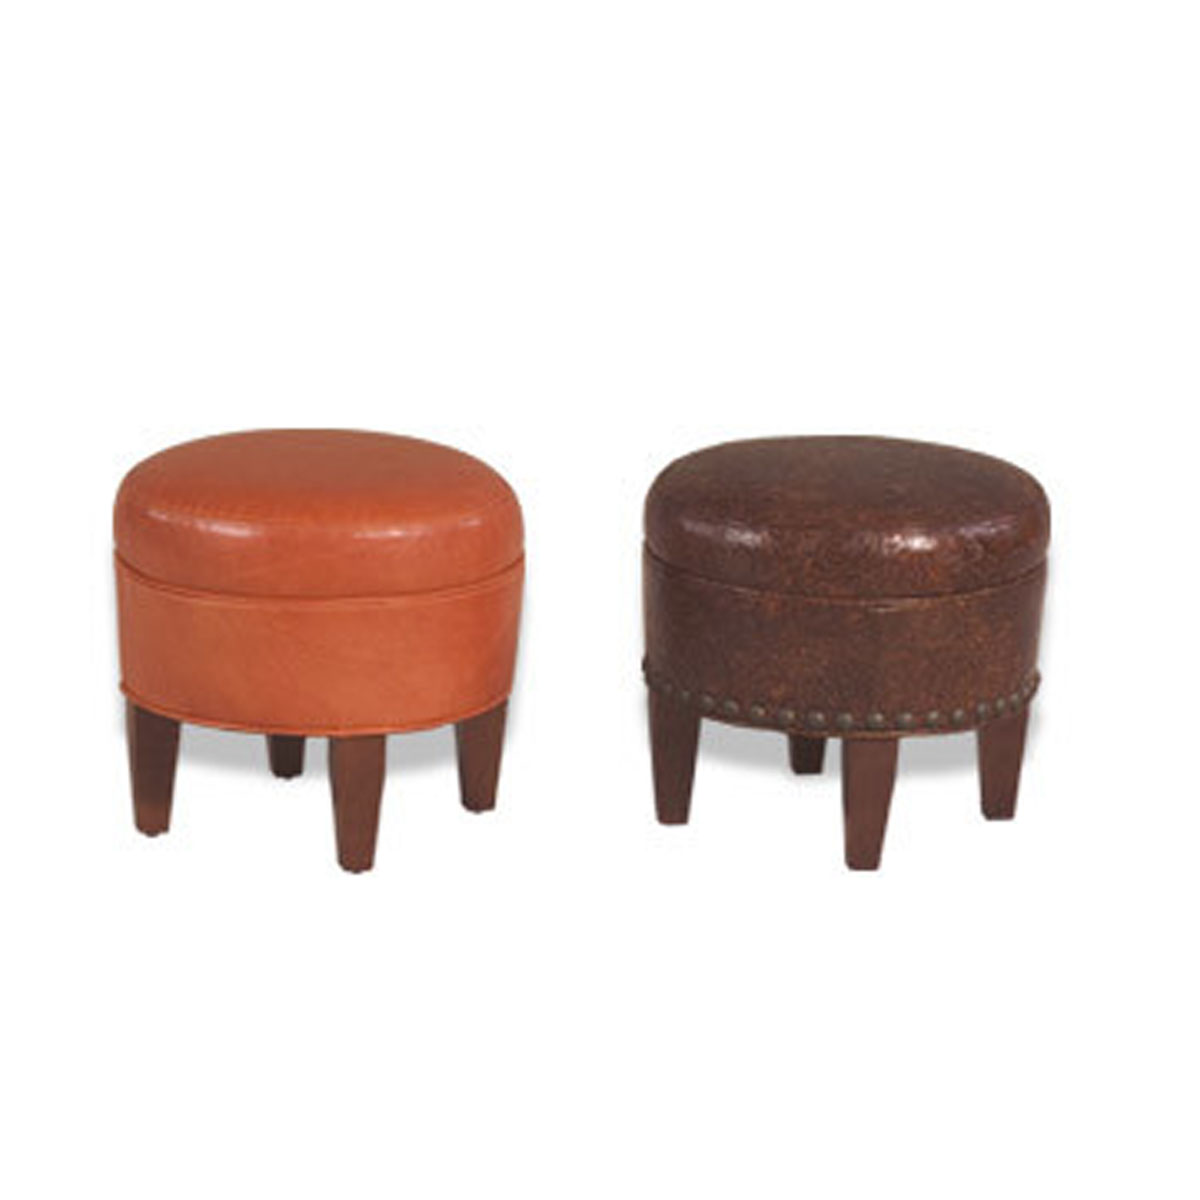 33 Alma 17 inch Round Stool by McKinley Leather